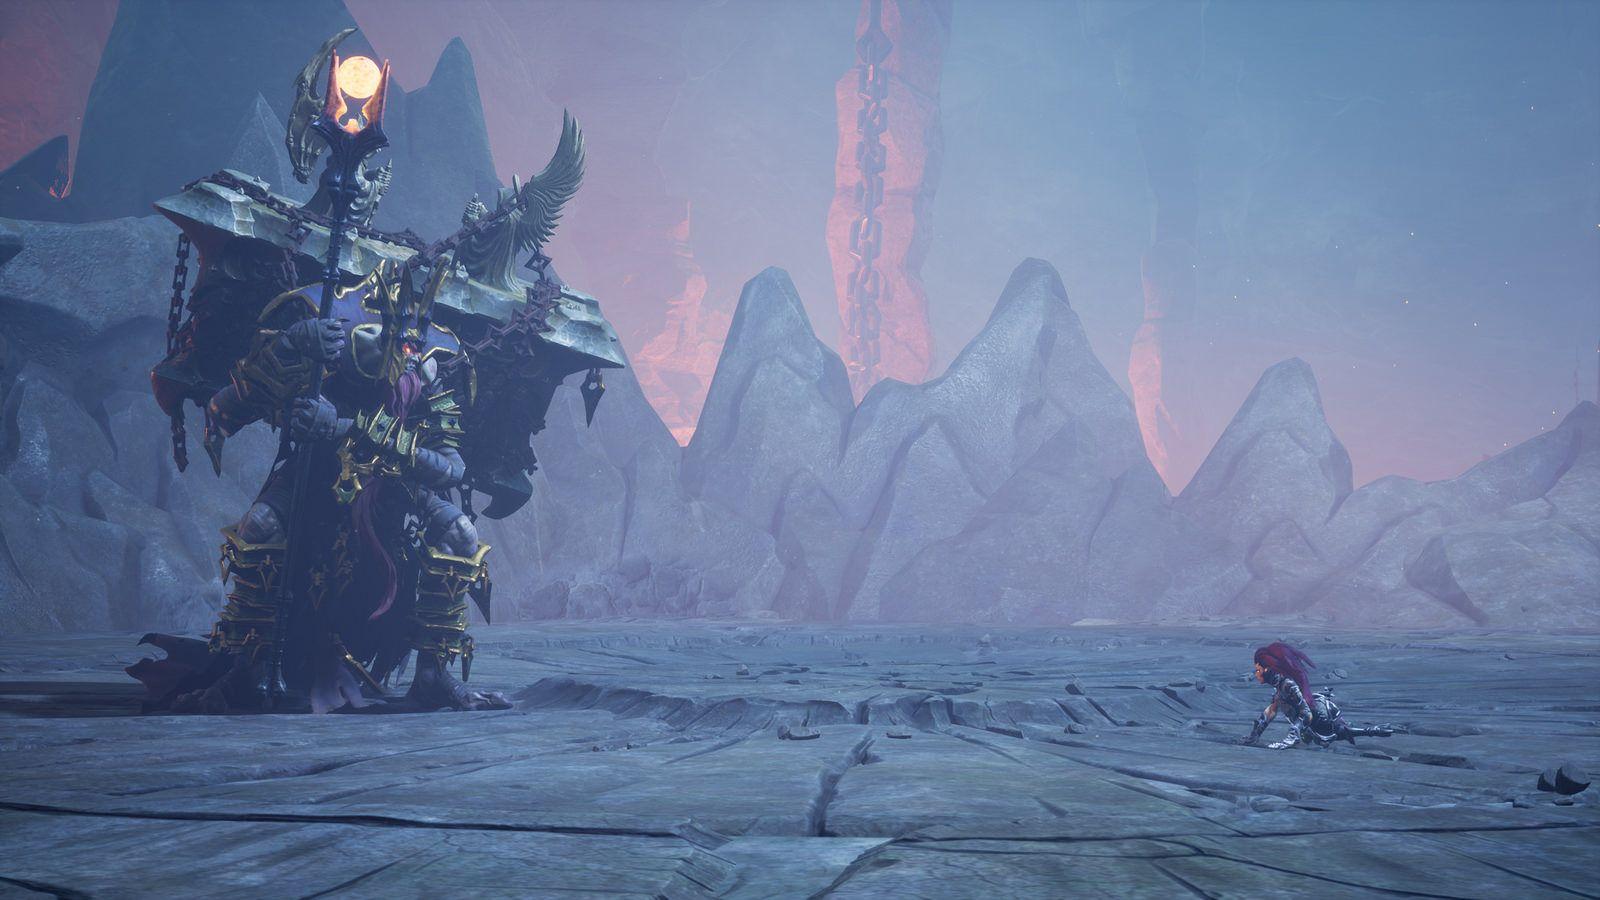 Darksiders III Update: First Look at Fury's Flame Form